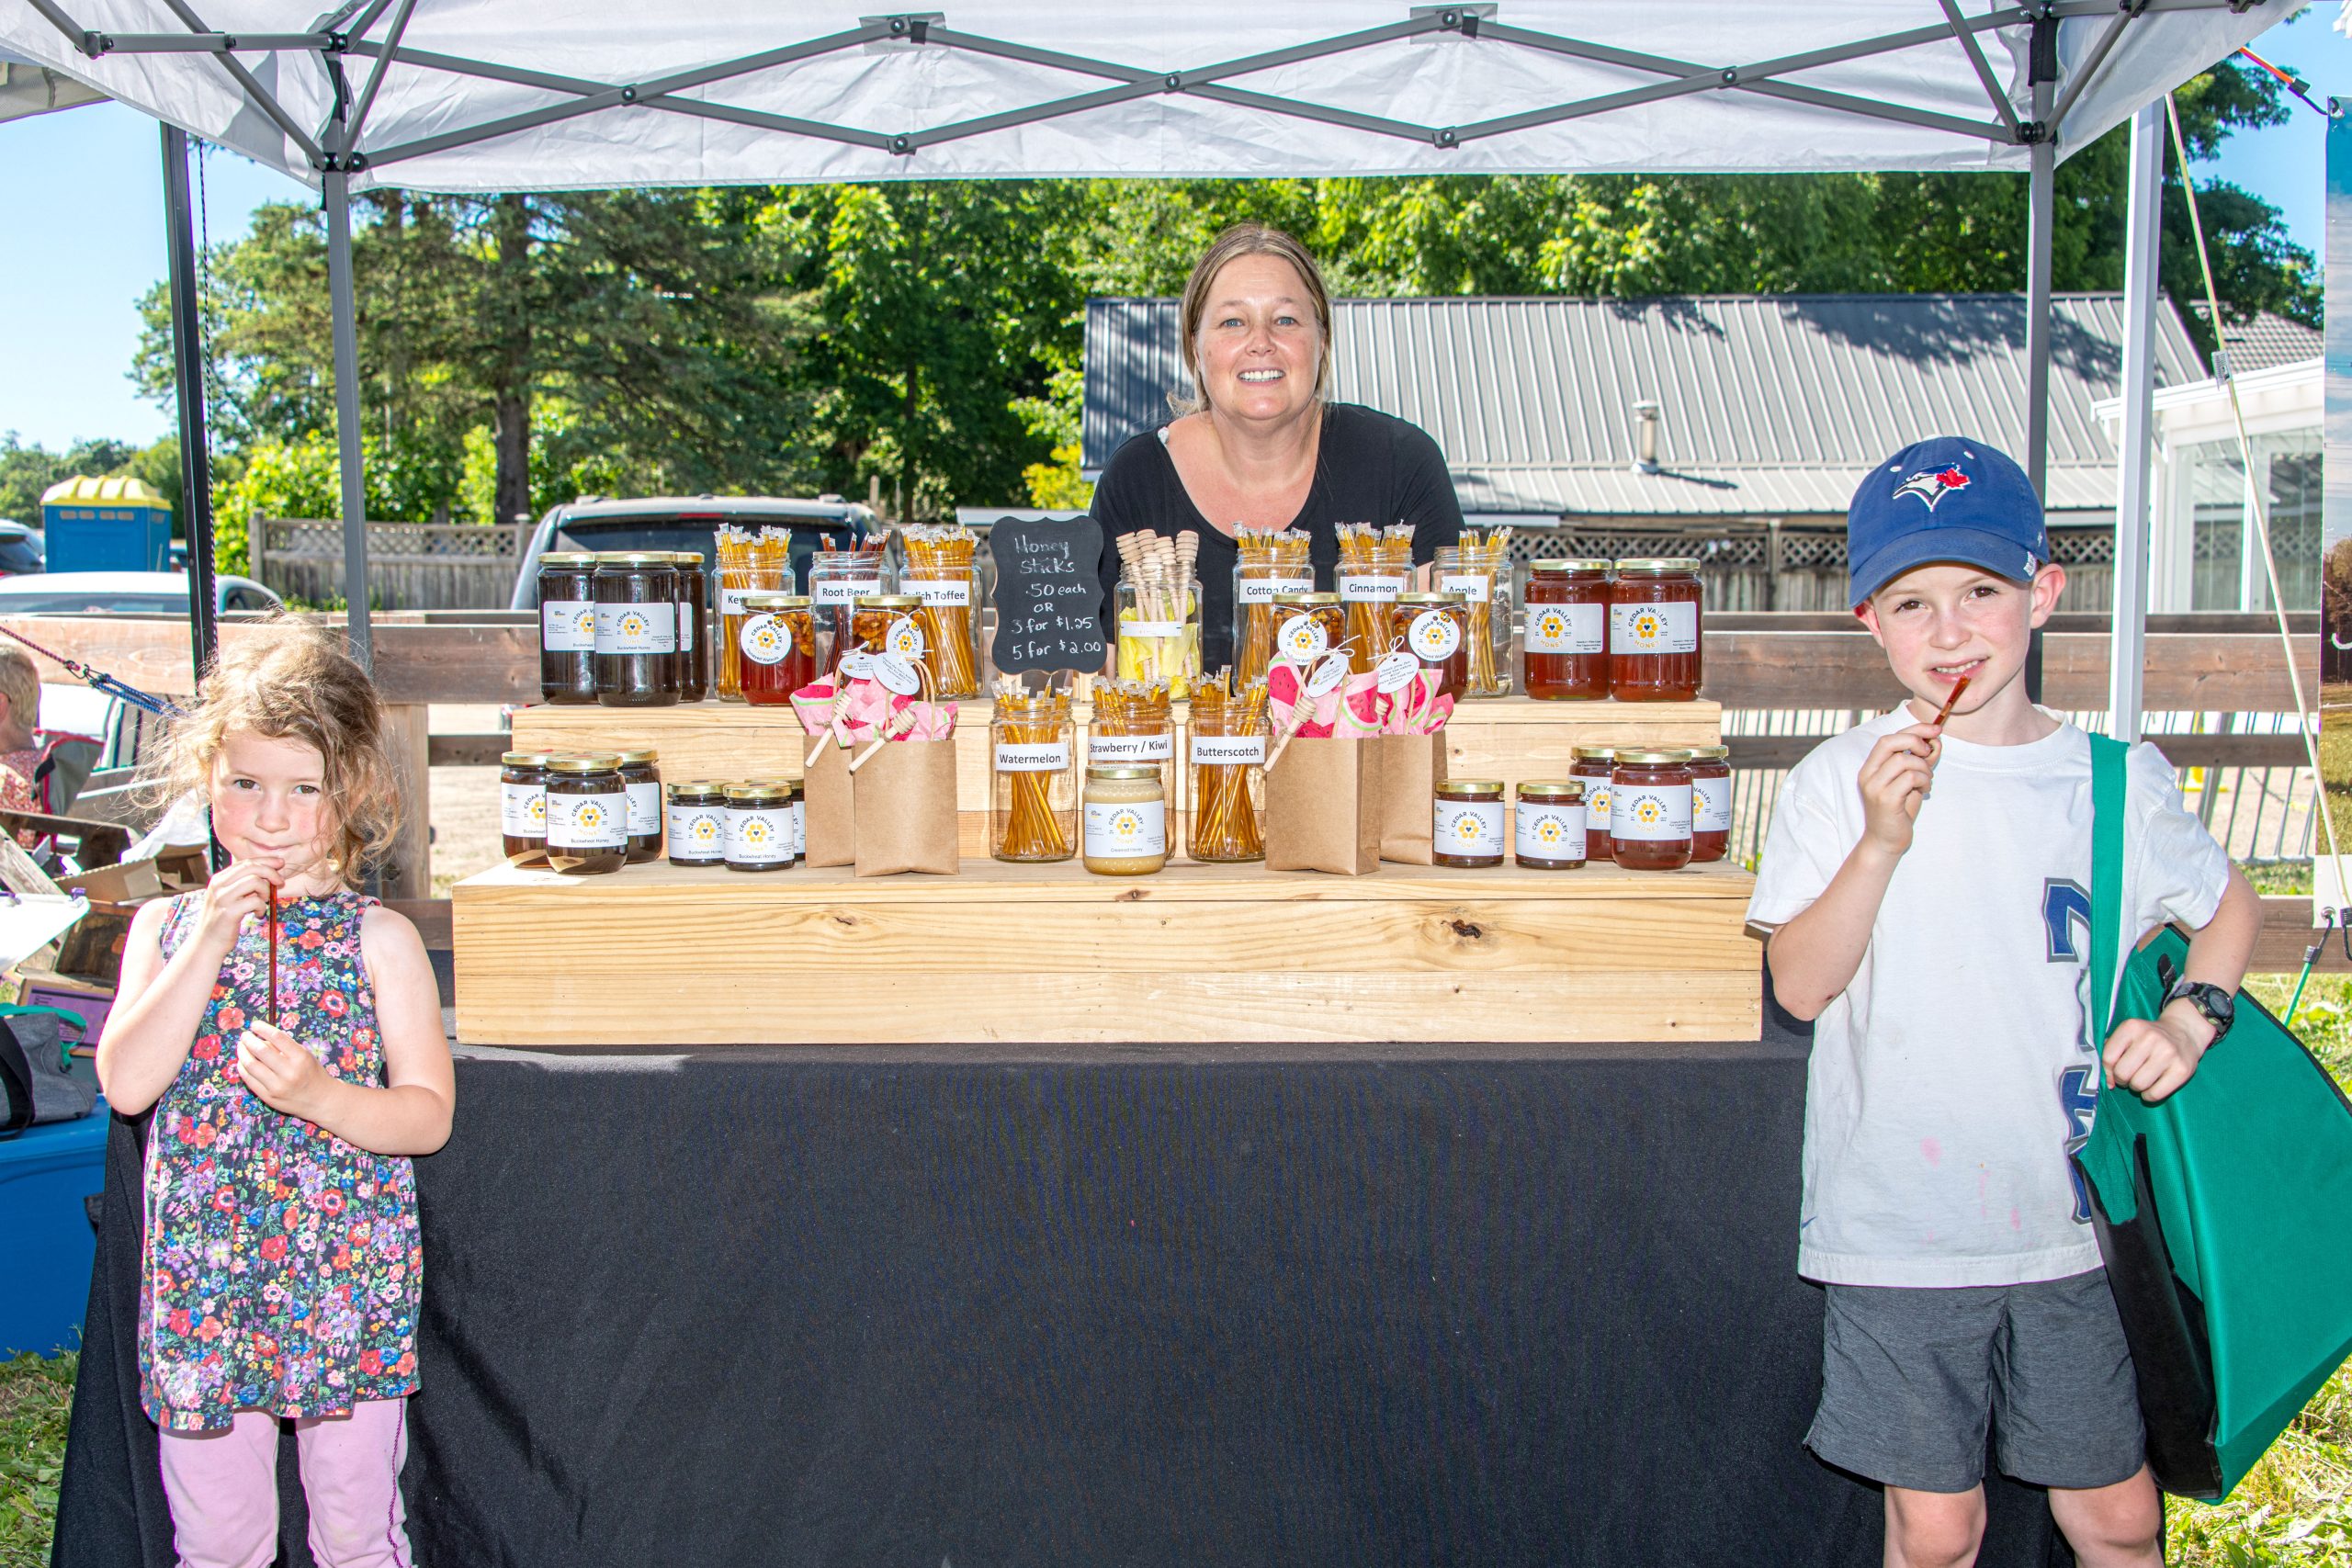 Sunday shopping comes to Erin Farmers’ Market